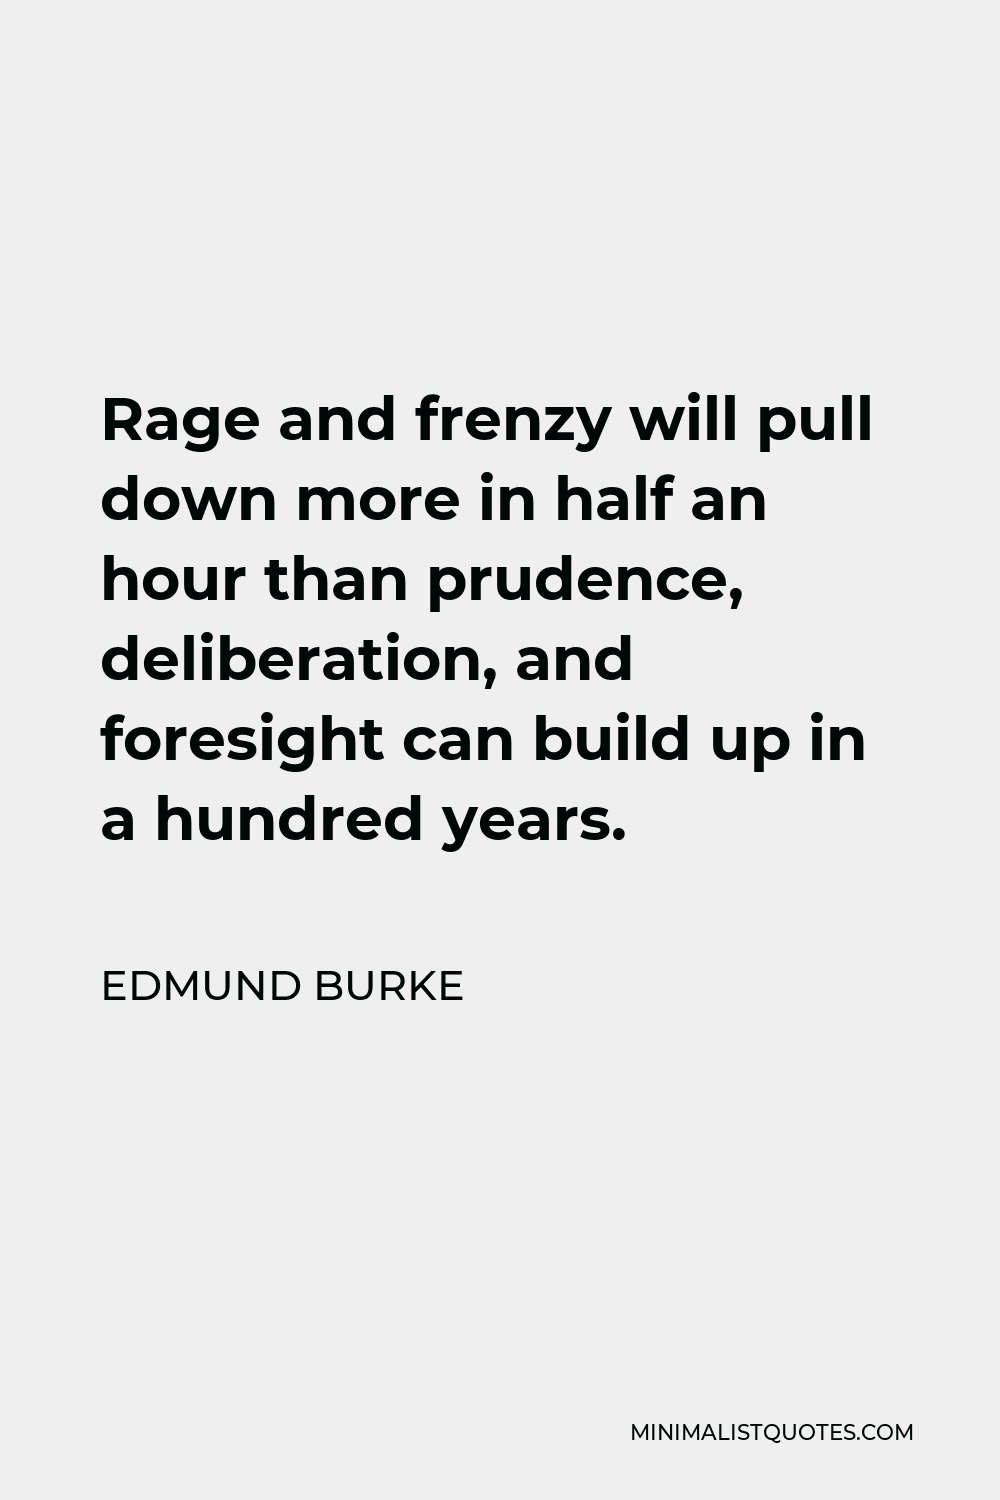 Edmund Burke Quote - Rage and frenzy will pull down more in half an hour than prudence, deliberation, and foresight can build up in a hundred years.